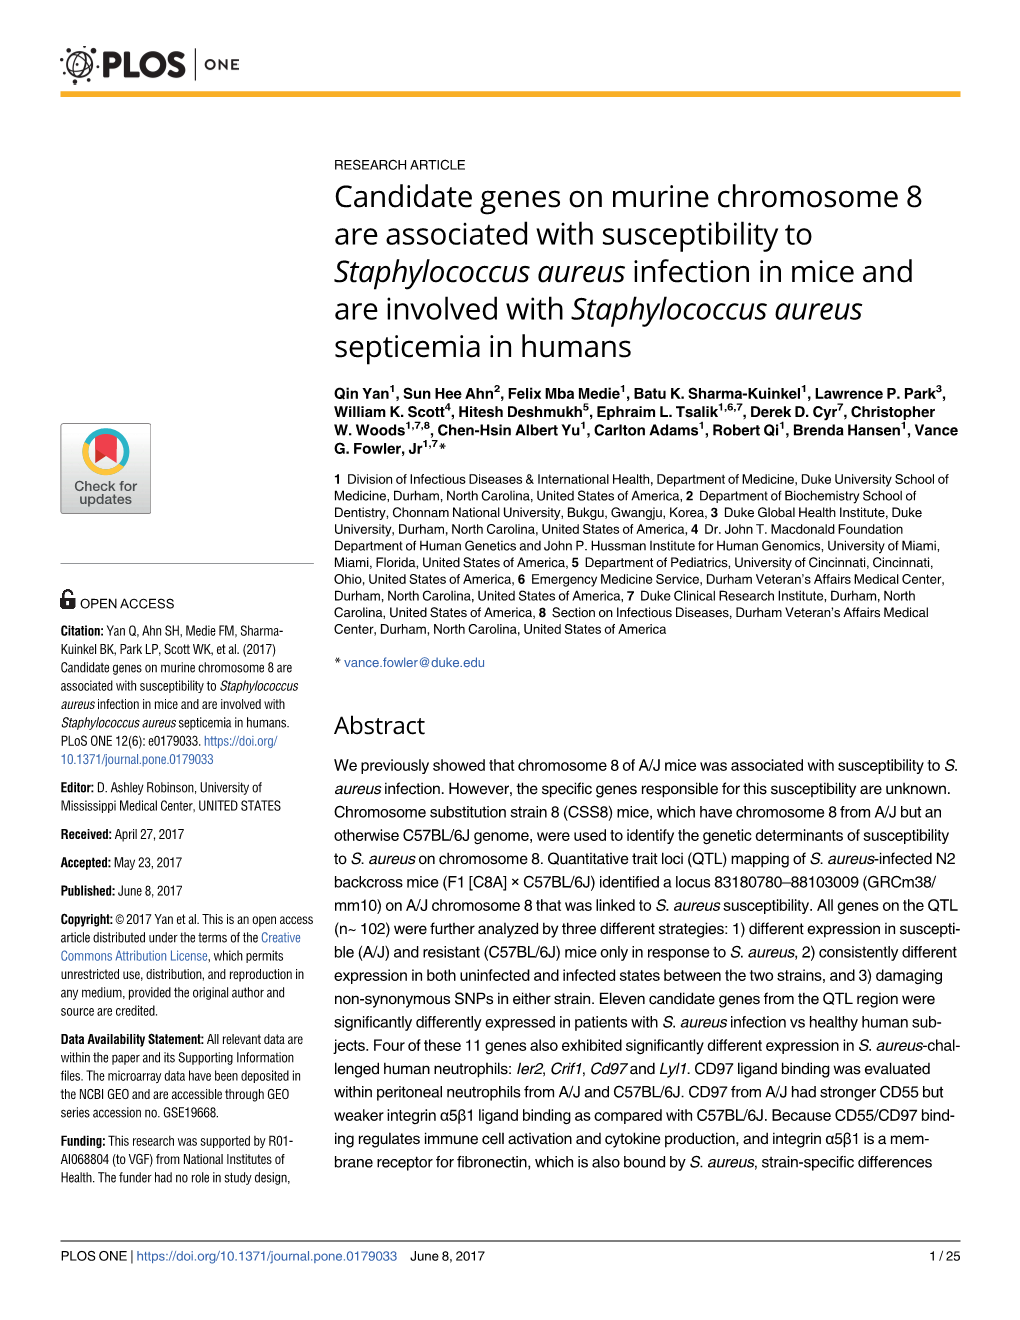 Candidate Genes on Murine Chromosome 8 Are Associated With